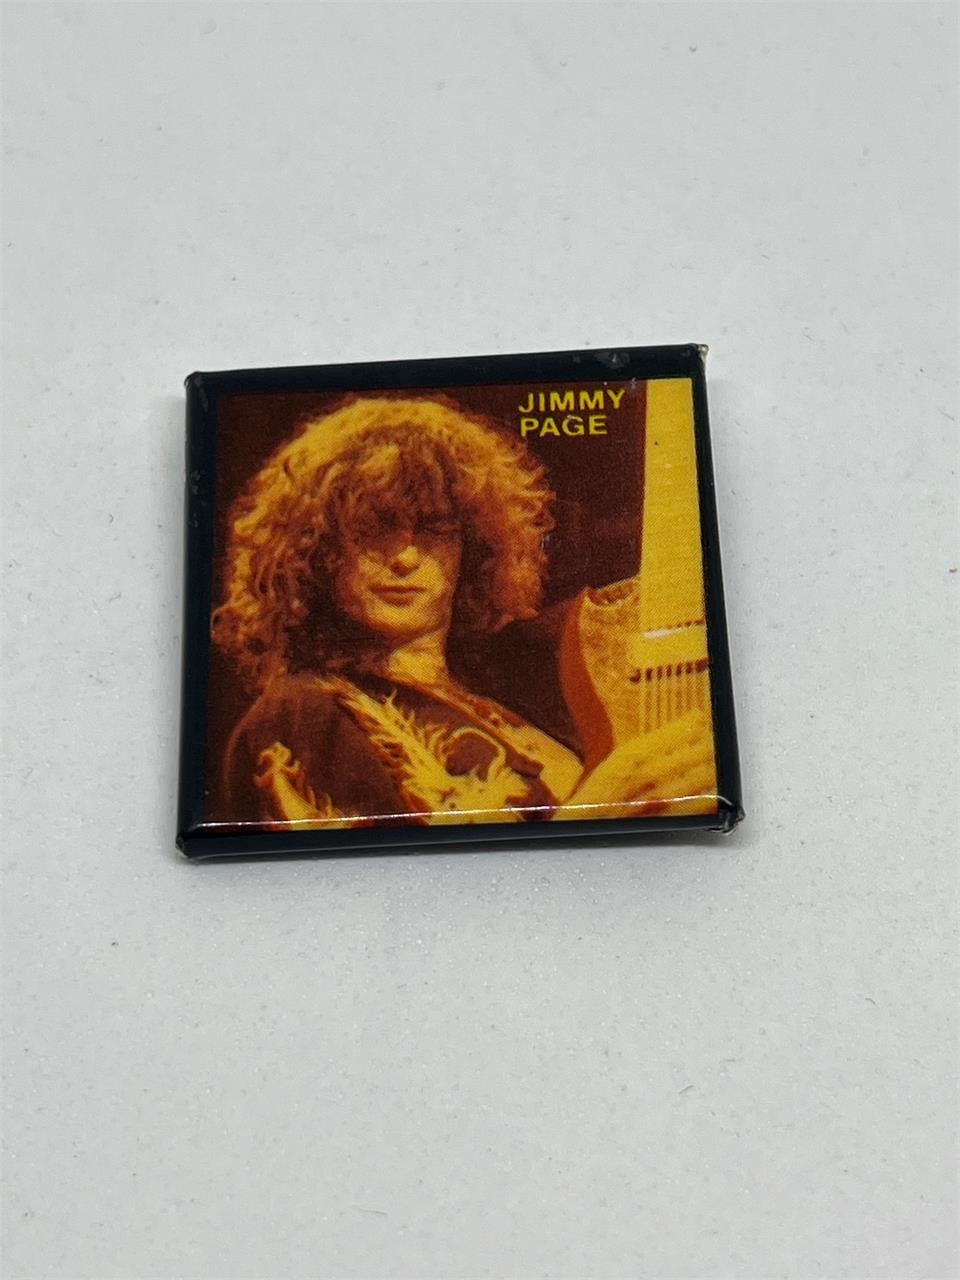 Vintage Led Zeppelin Band Pin Button Jimmy Page